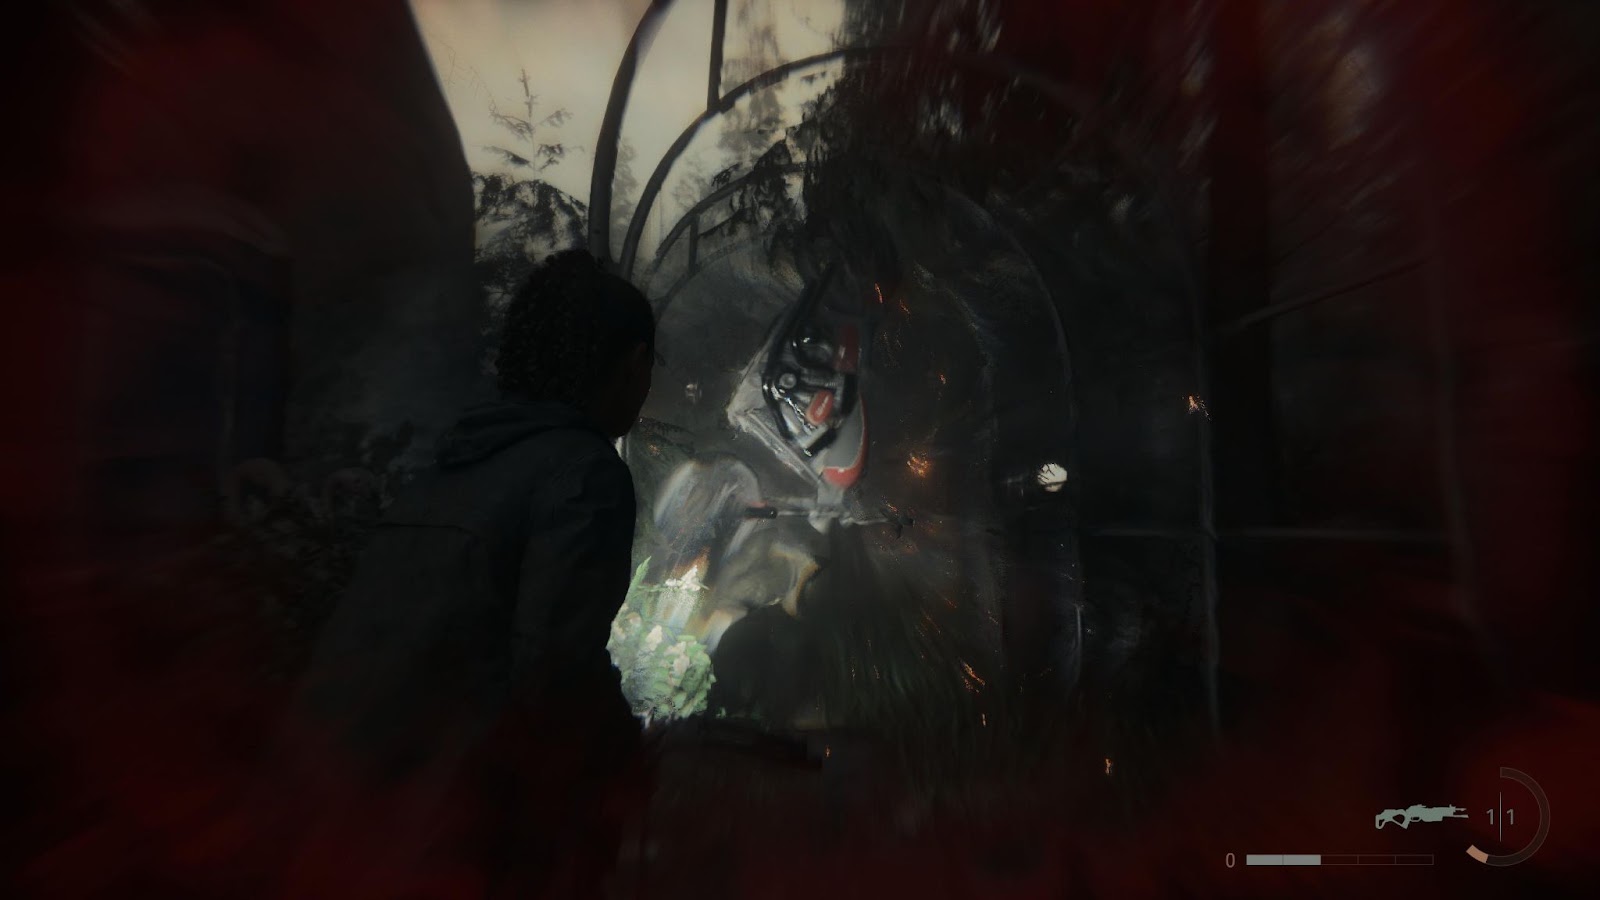 An in game screenshot of the darkness from Alan Wake 2